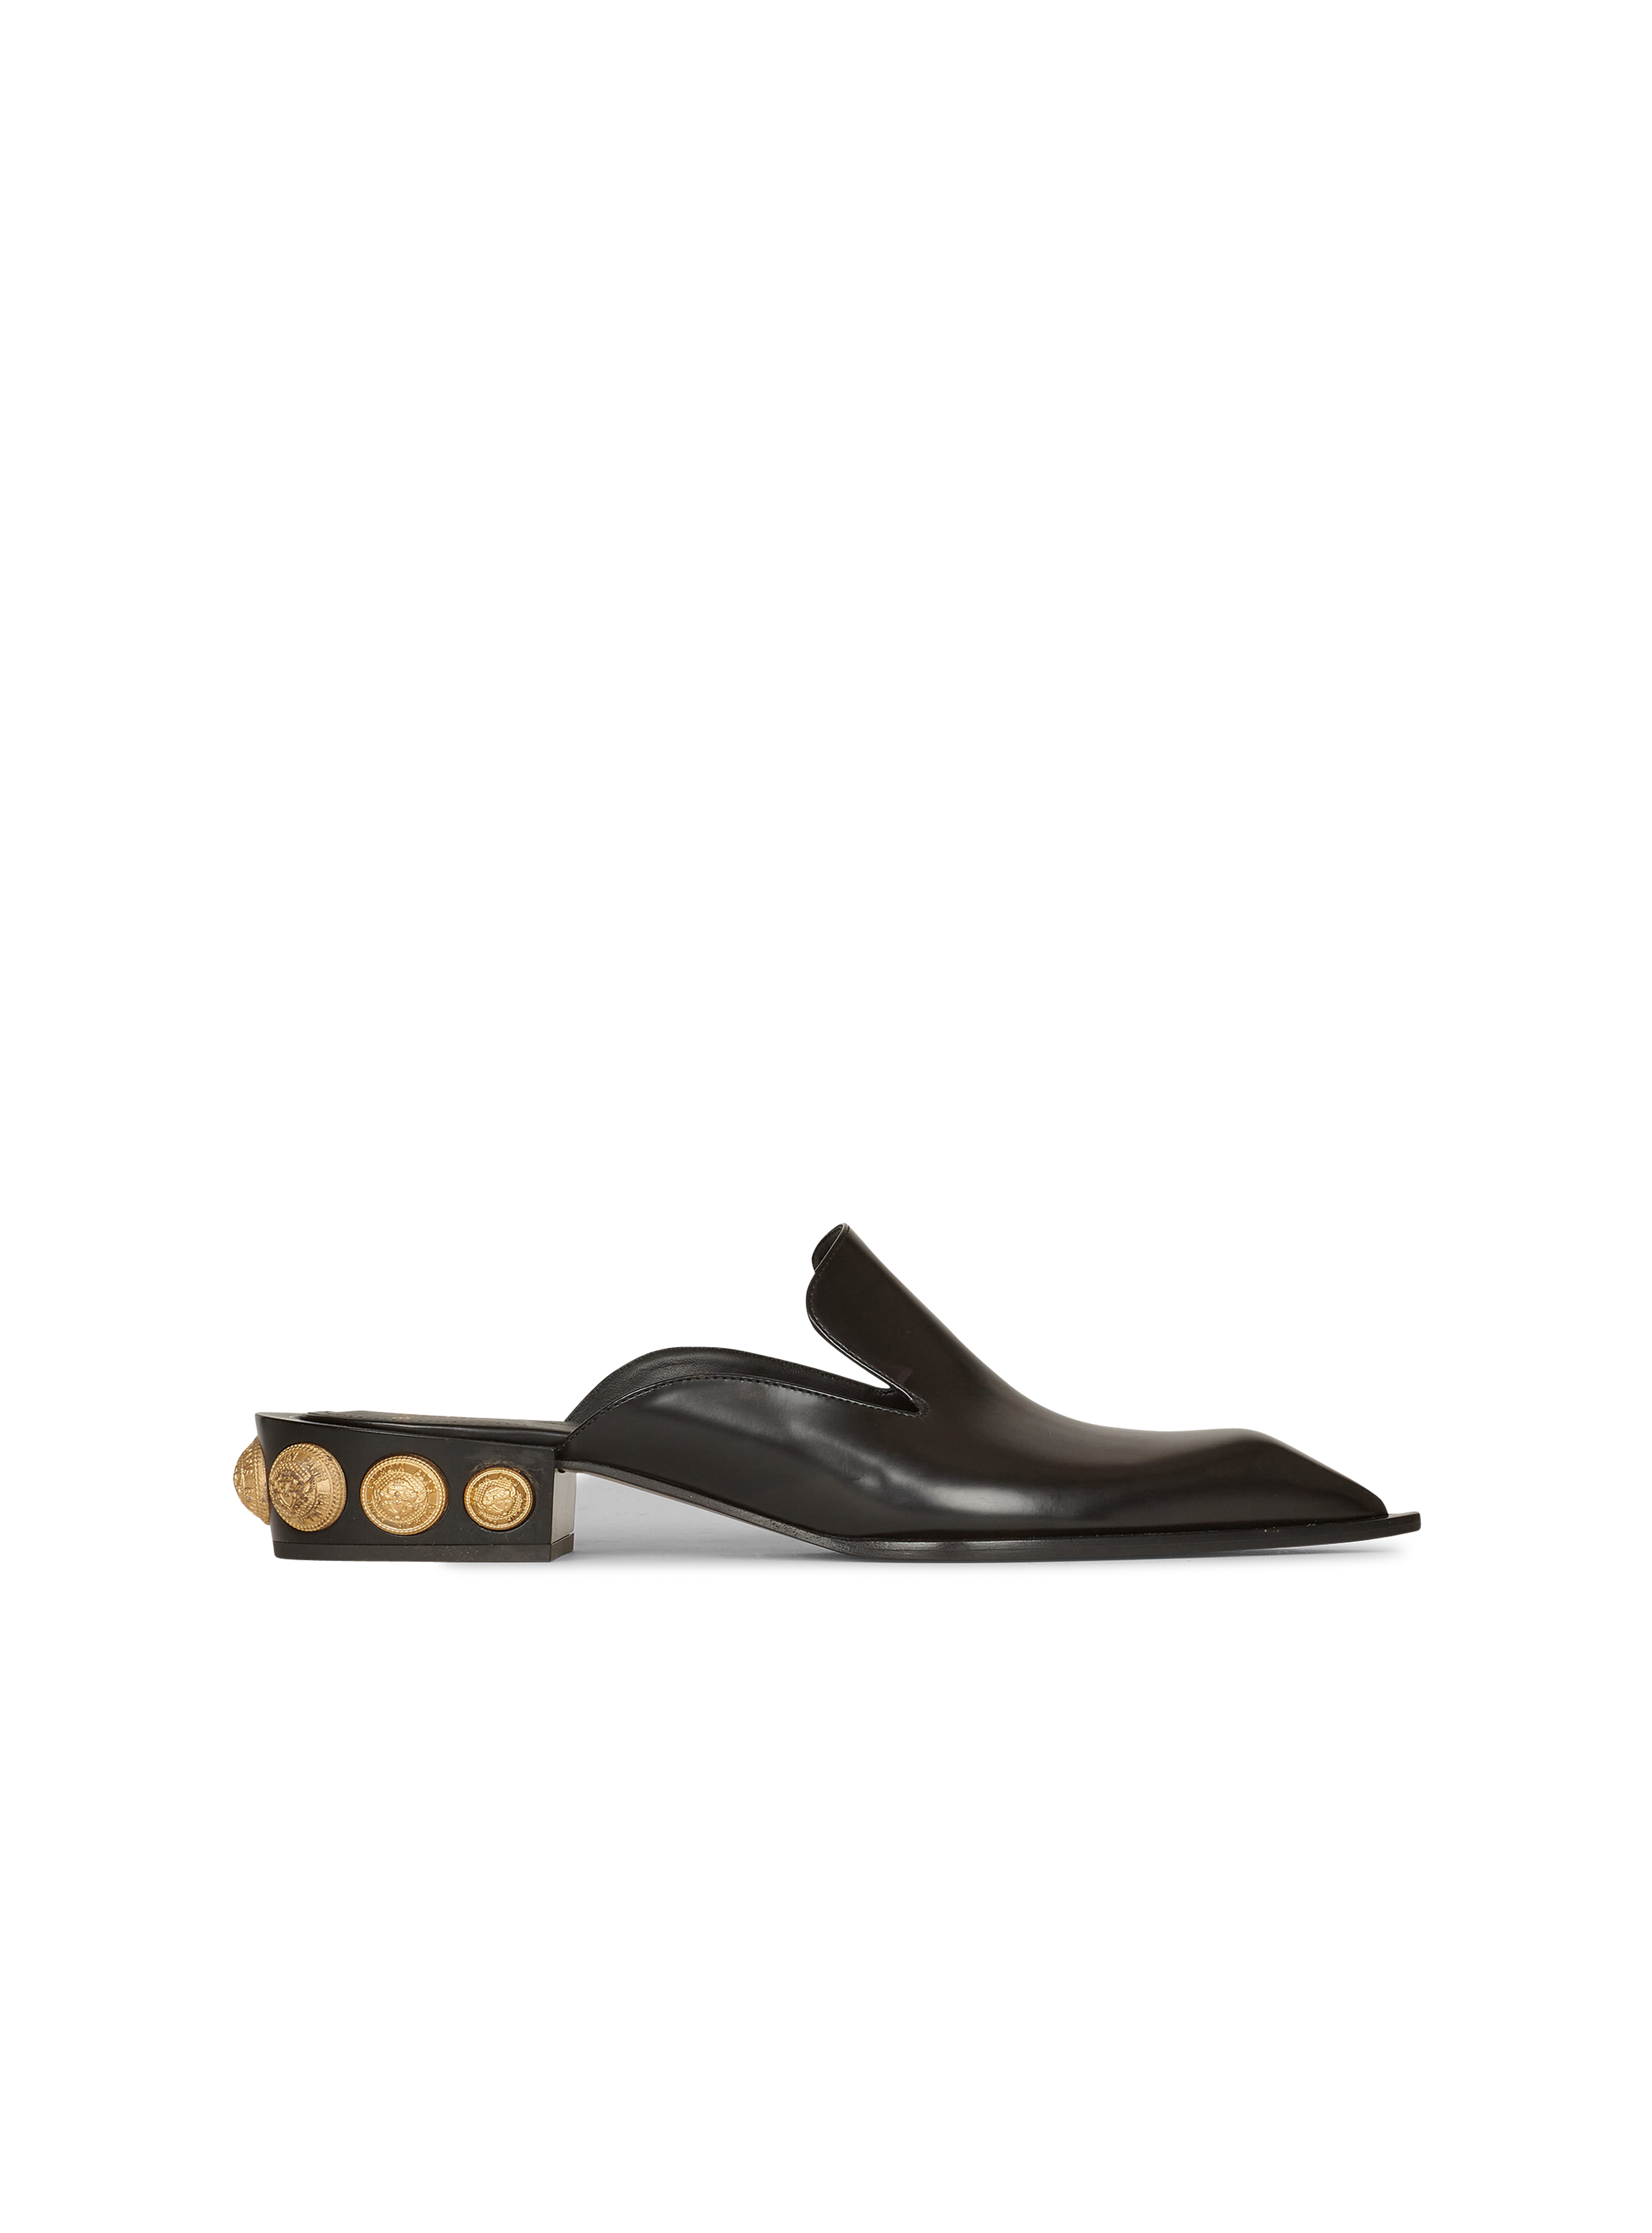 Shiny leather Coin mule loafers, black